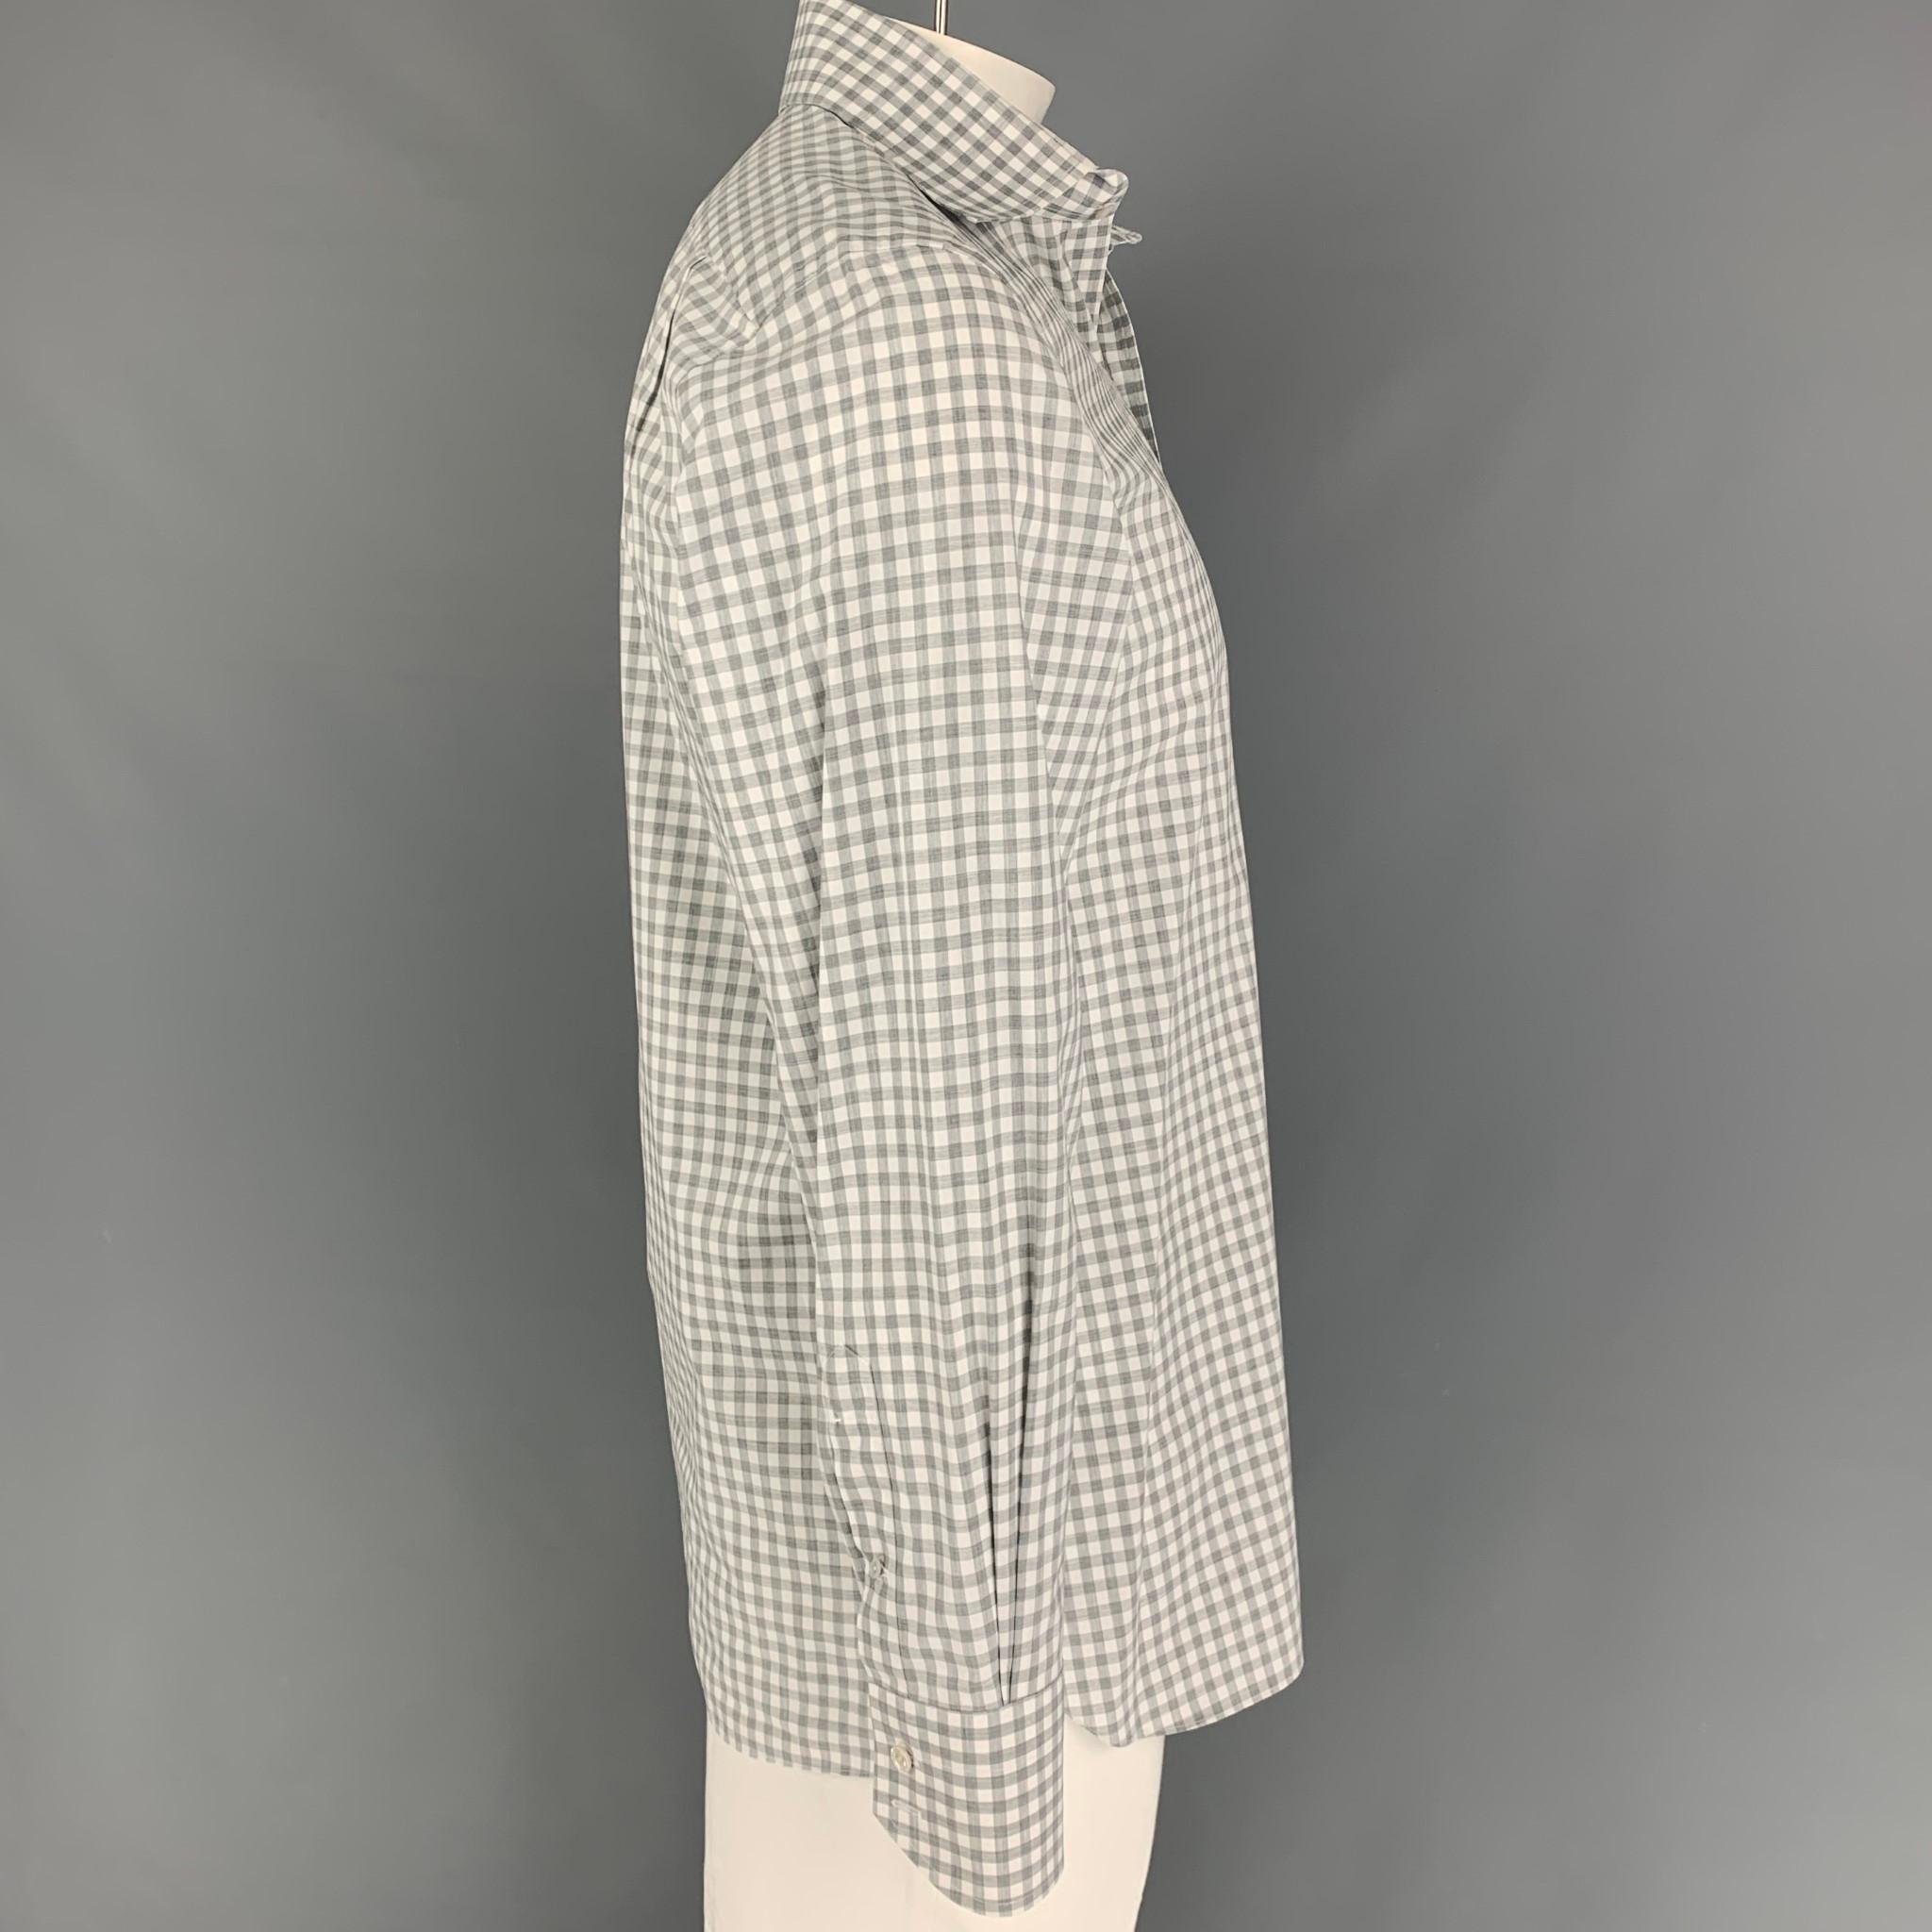 TOM FORD long sleeve shirt comes in a light gray gingham cotton featuring a spread collar and a button up closure. Made in Italy. 

Very Good Pre-Owned Condition.
Marked: 41/16

Measurements:

Shoulder: 18 in.
Chest: 42 in.
Sleeve: 26.5 in.
Length: